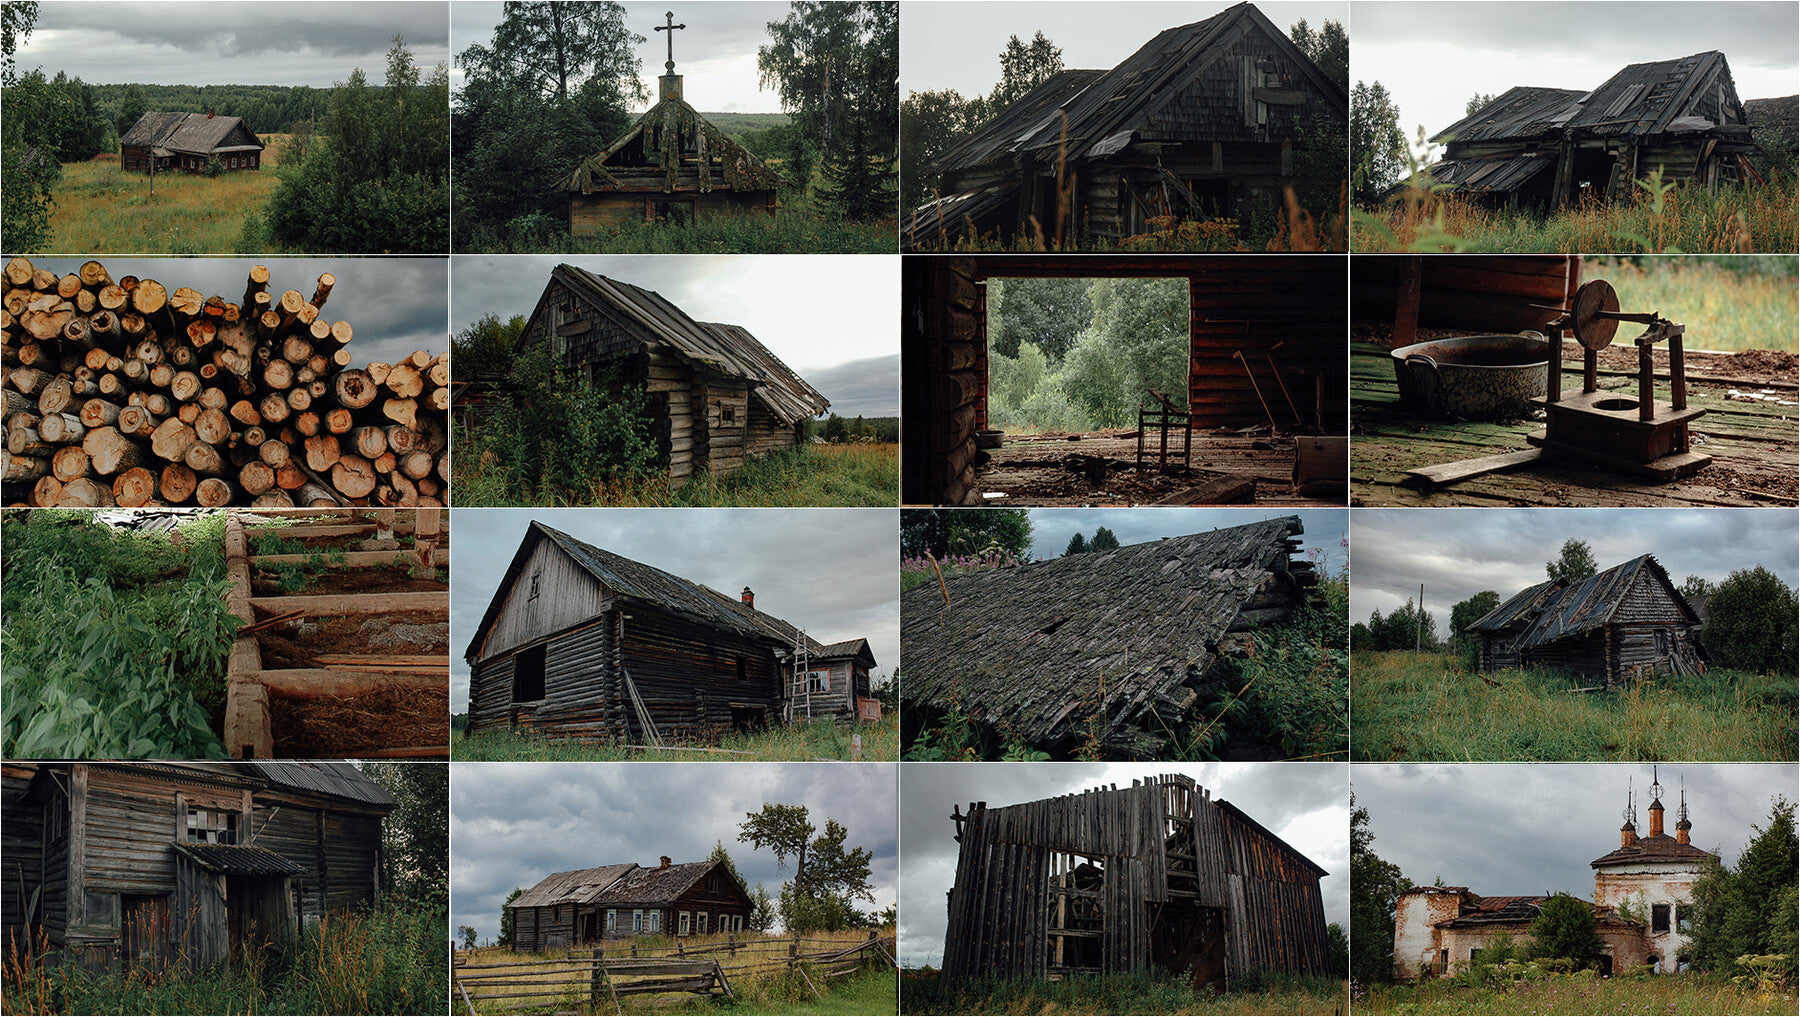 1000+ Abandoned Russian Village Reference Pictures